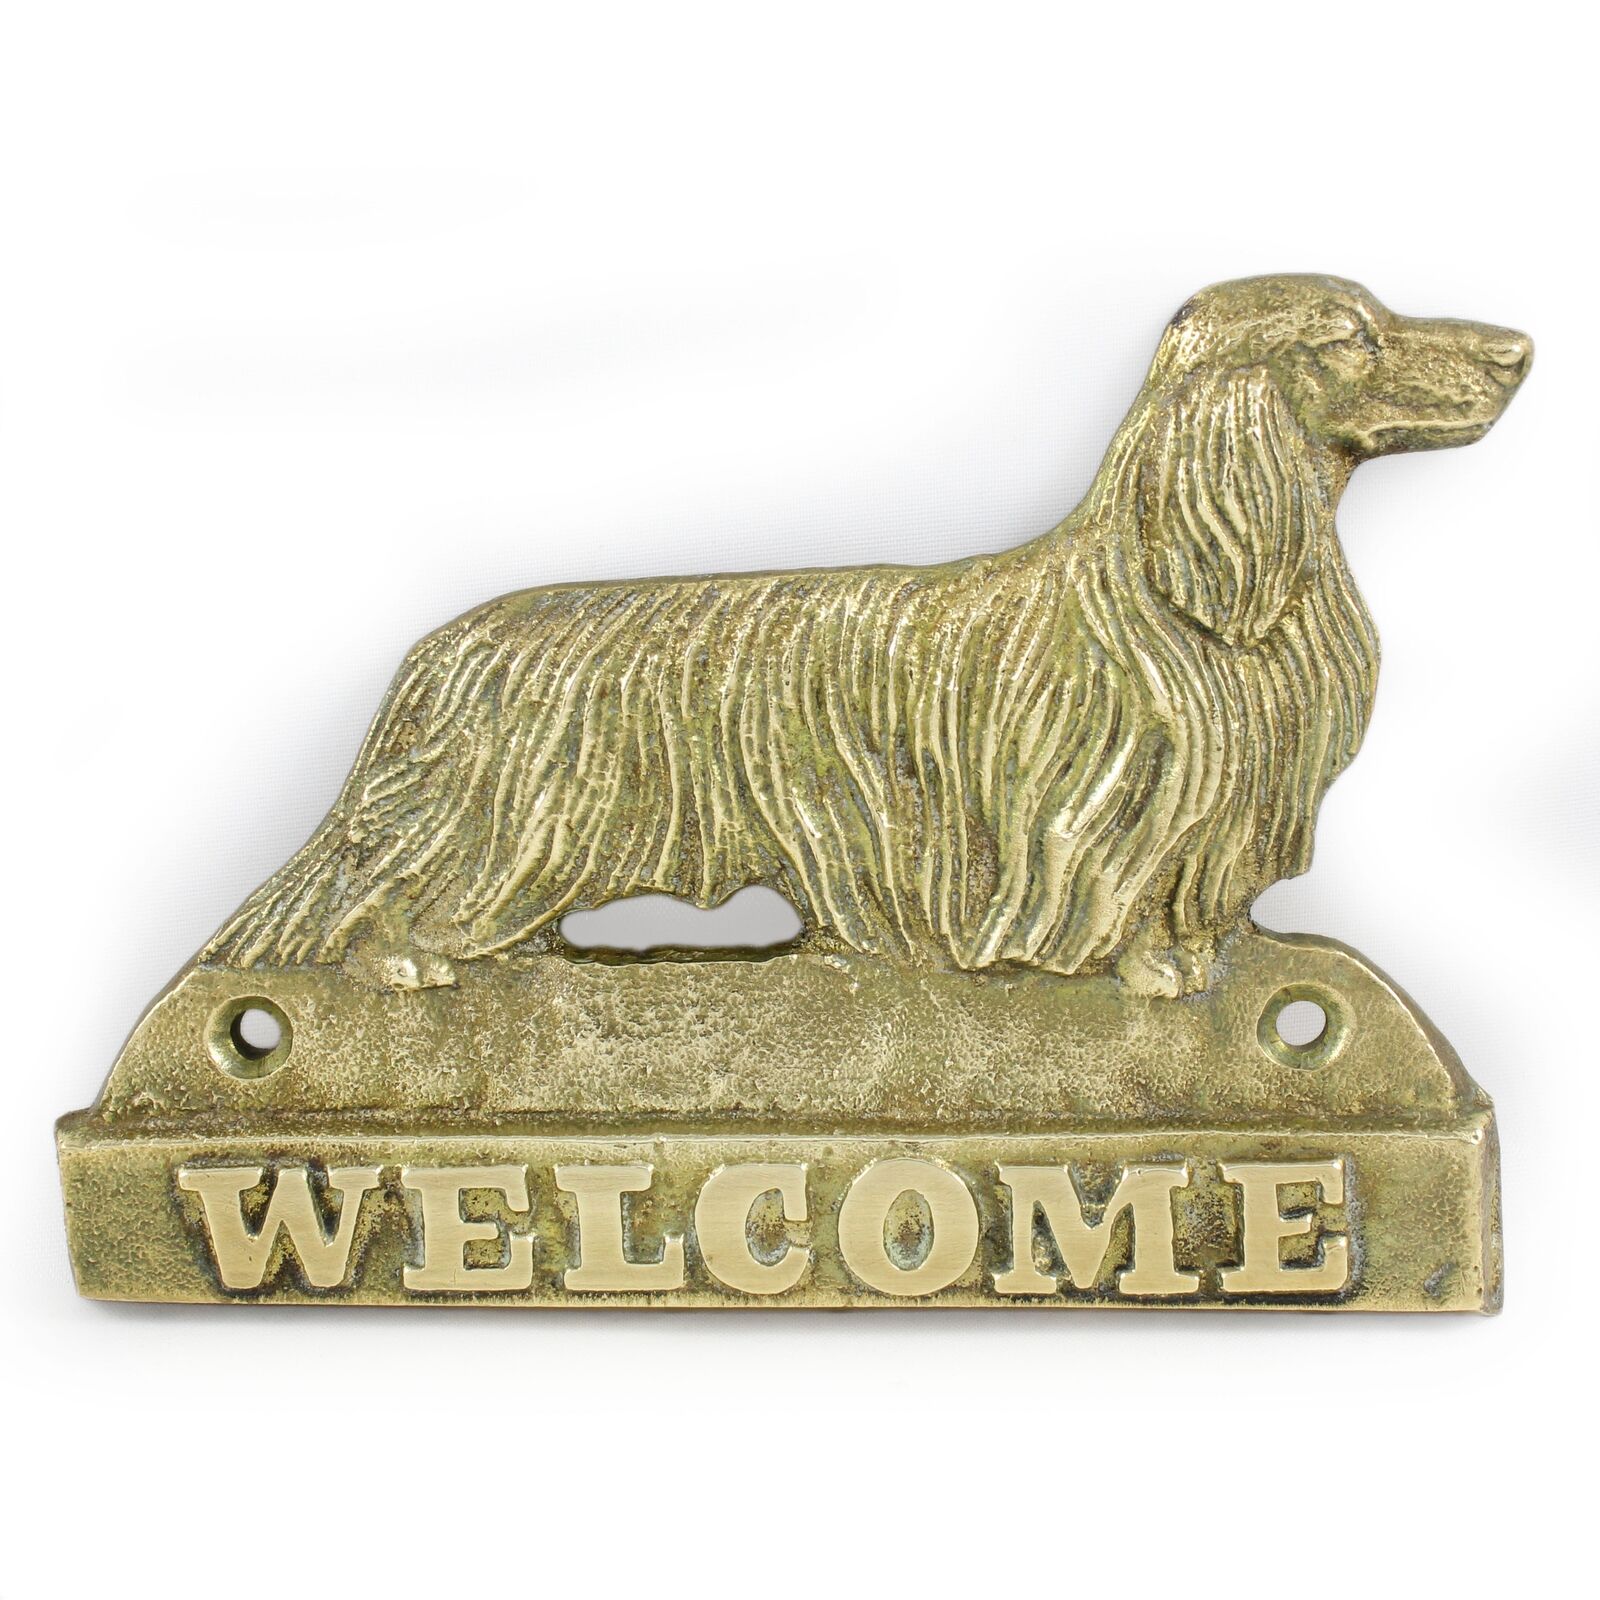 Dachshund Long-Haired - Brass Plate with The Inscription \'Welcome\' Art Dog